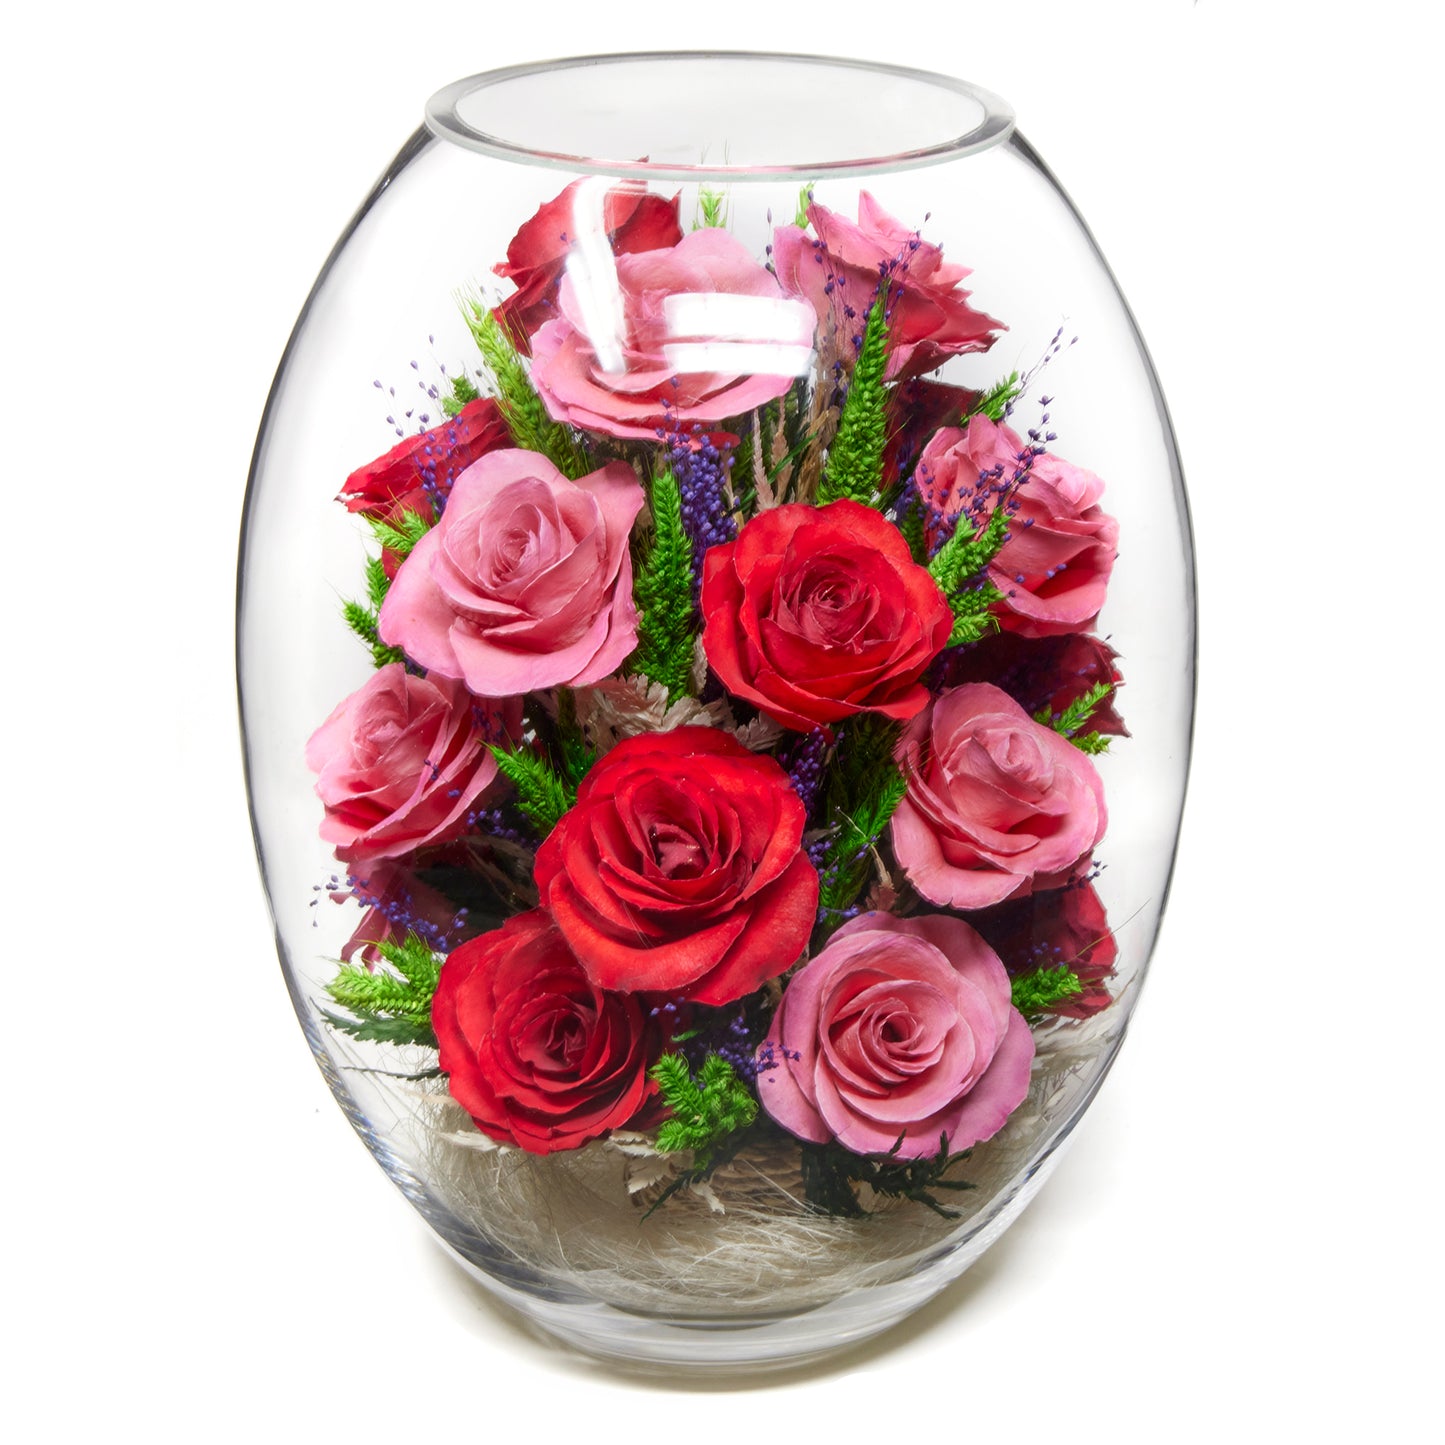 In Flores Veritas: Rose Elegance Grand Vase - Lasts up to 5 Years - Elegant Gift for Any Occasion